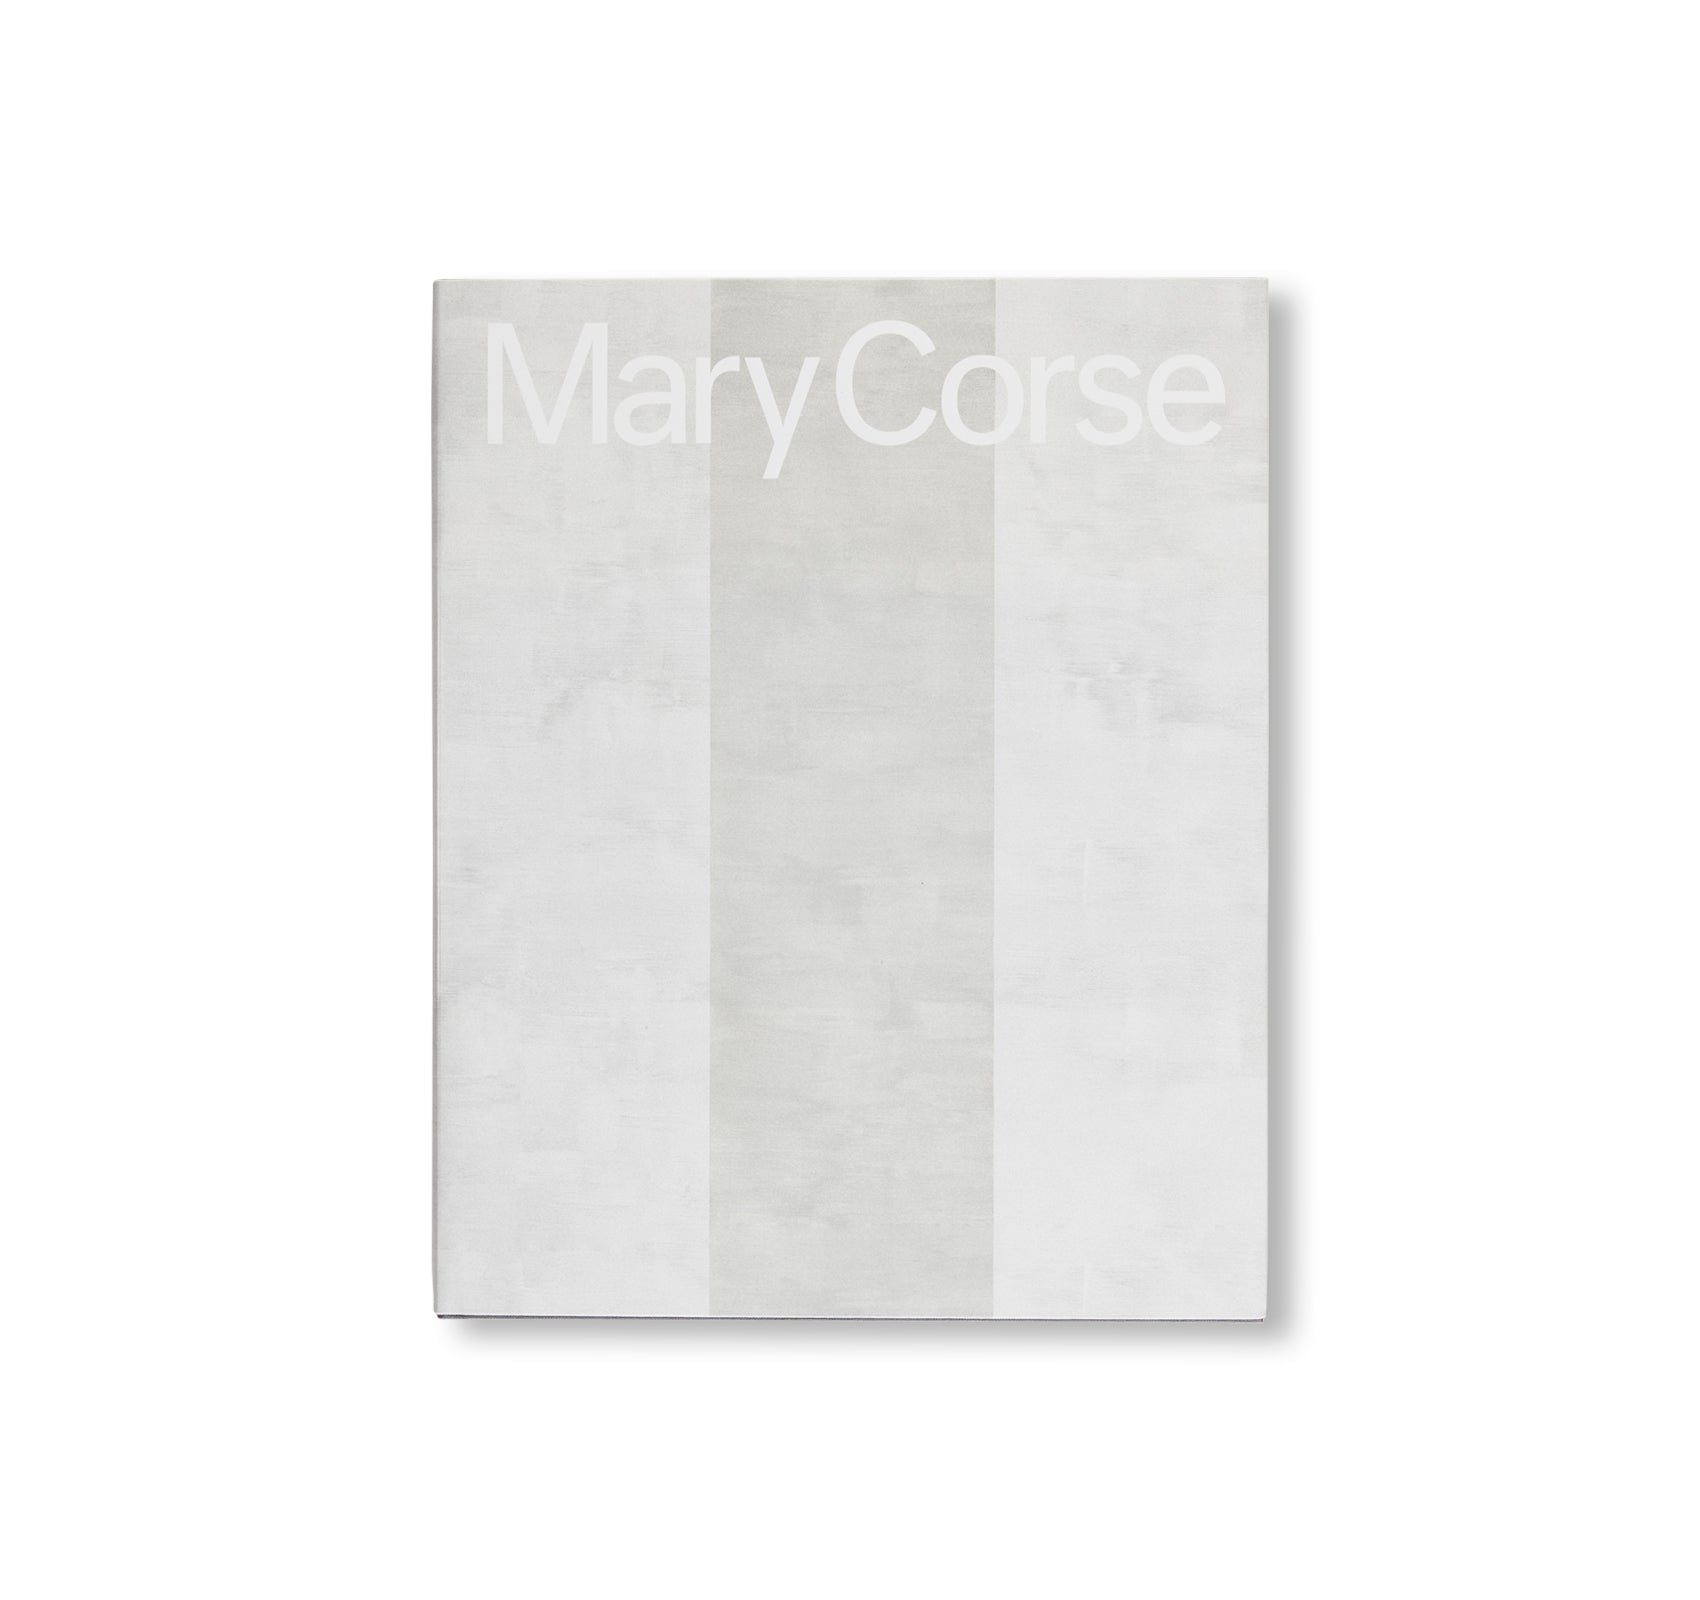 MARY CORSE by Mary Corse